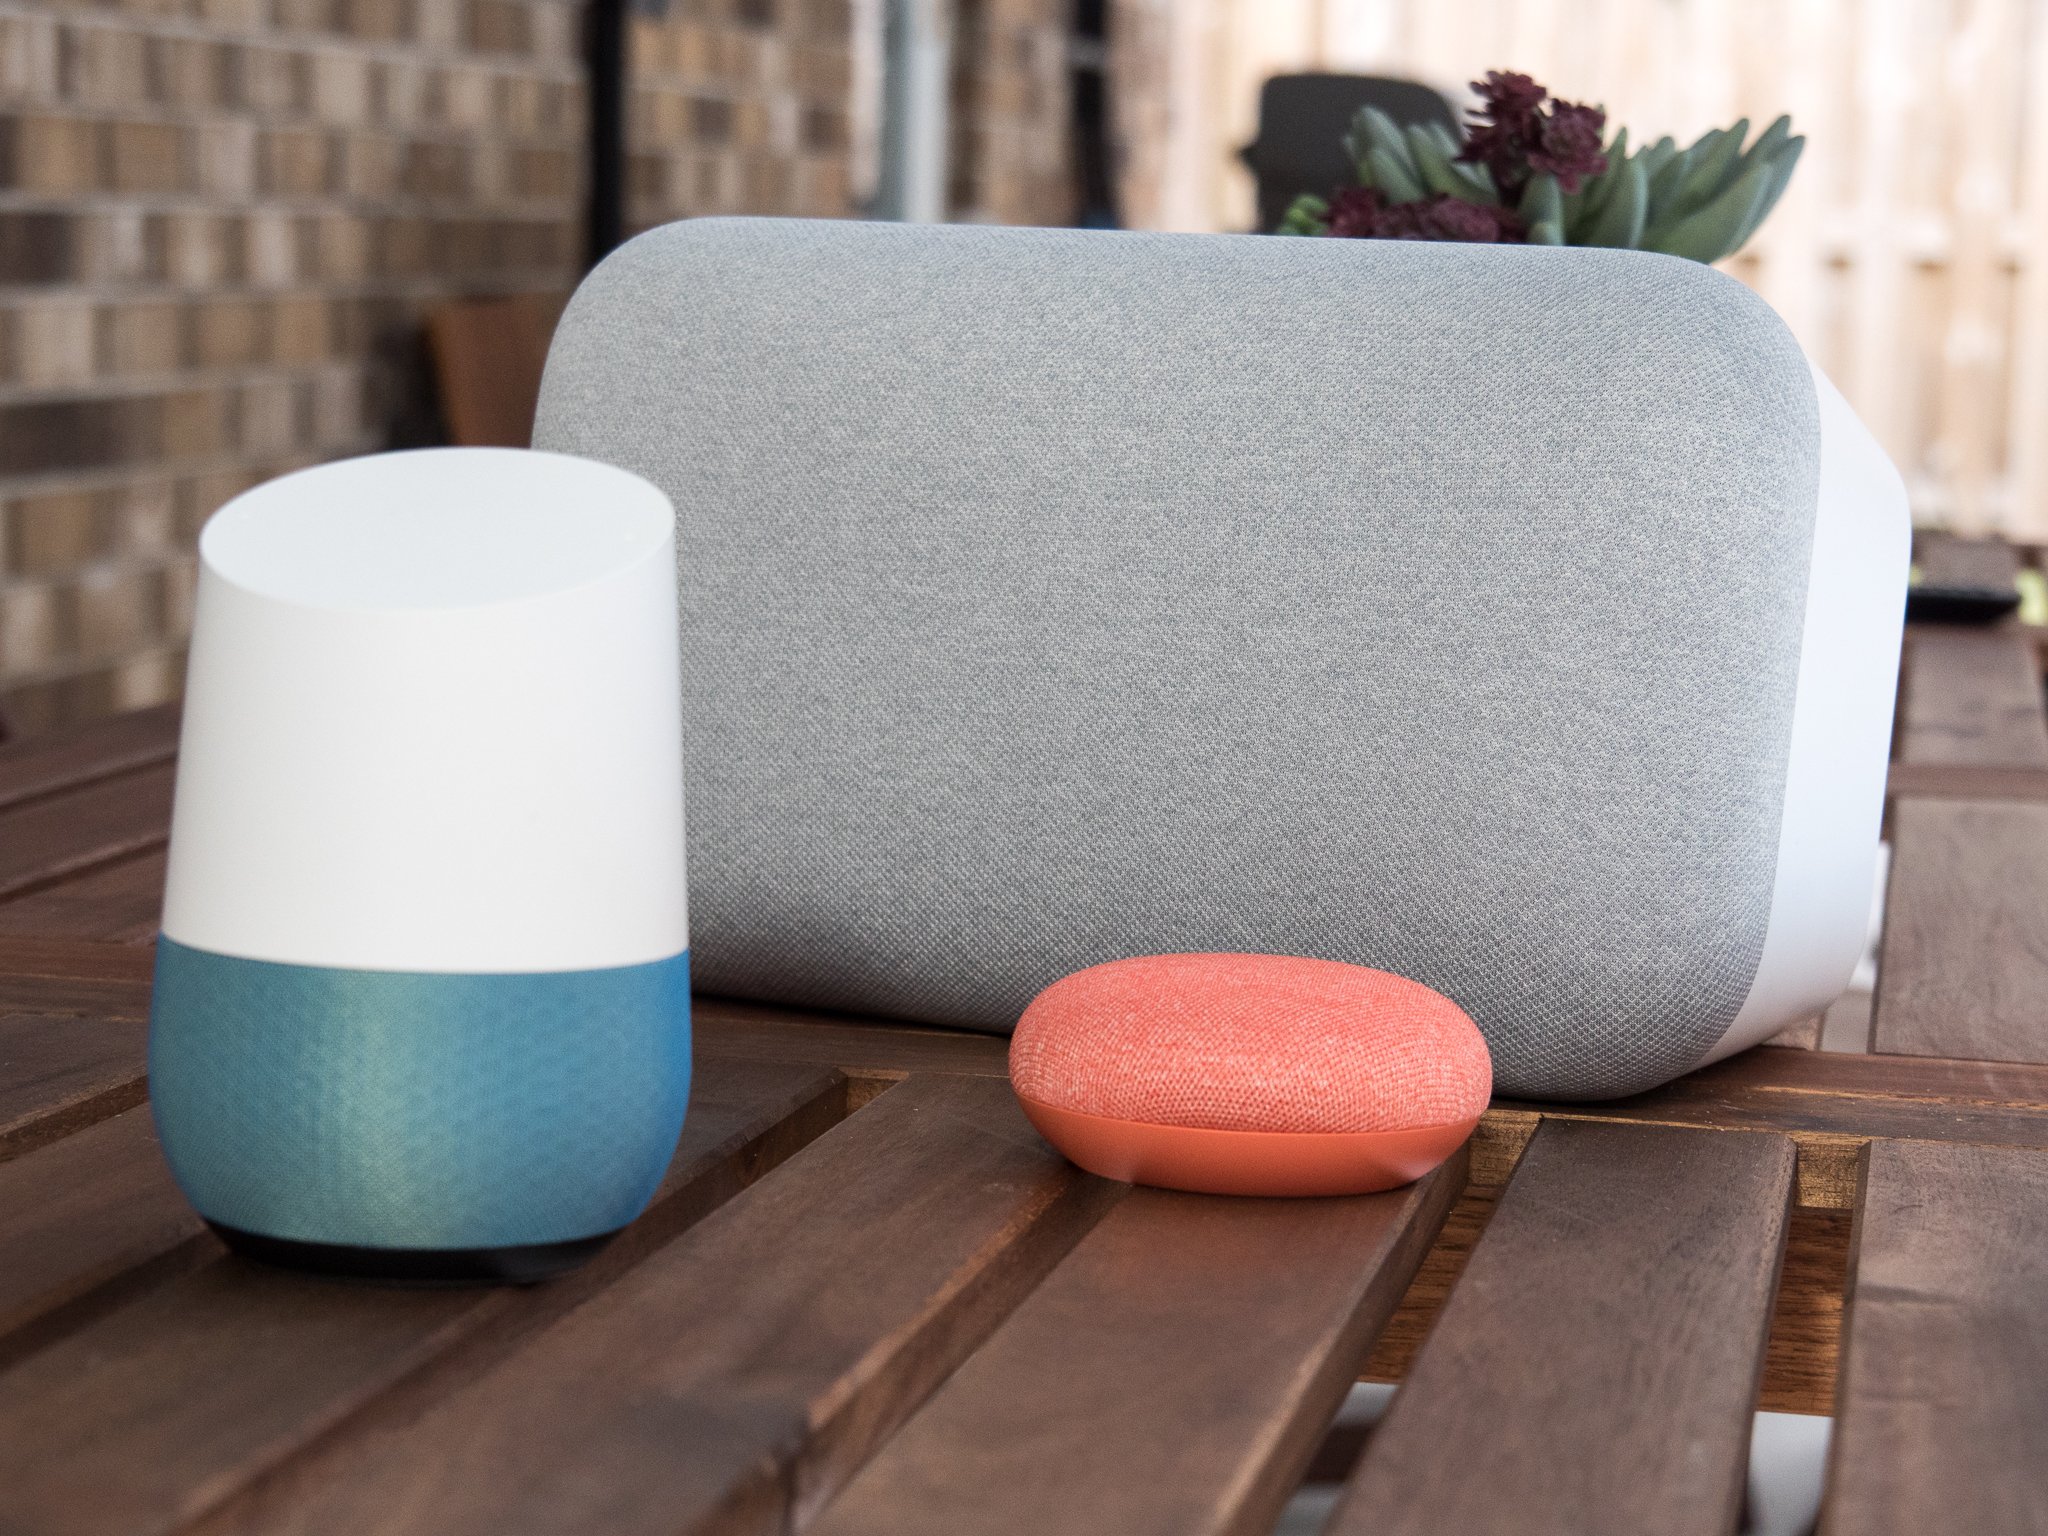 how to install google assistant to speaker